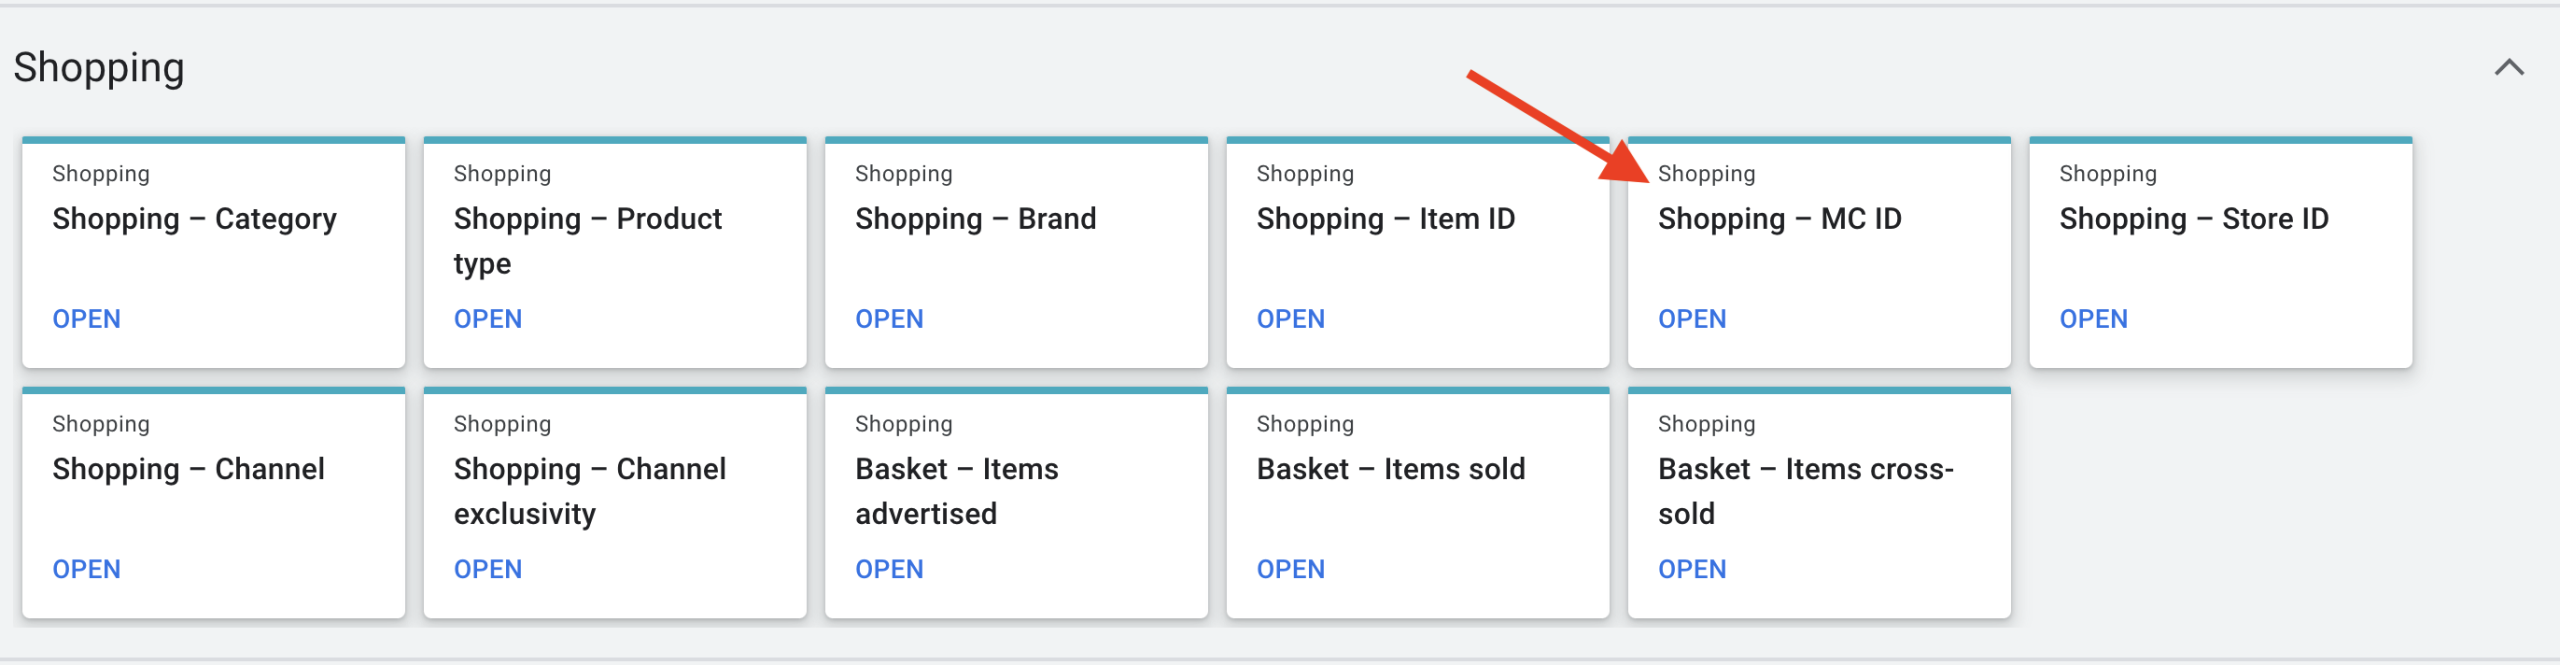 Screen shot of showing where to find Shopping - MC ID report in Google Ads Reporting interface